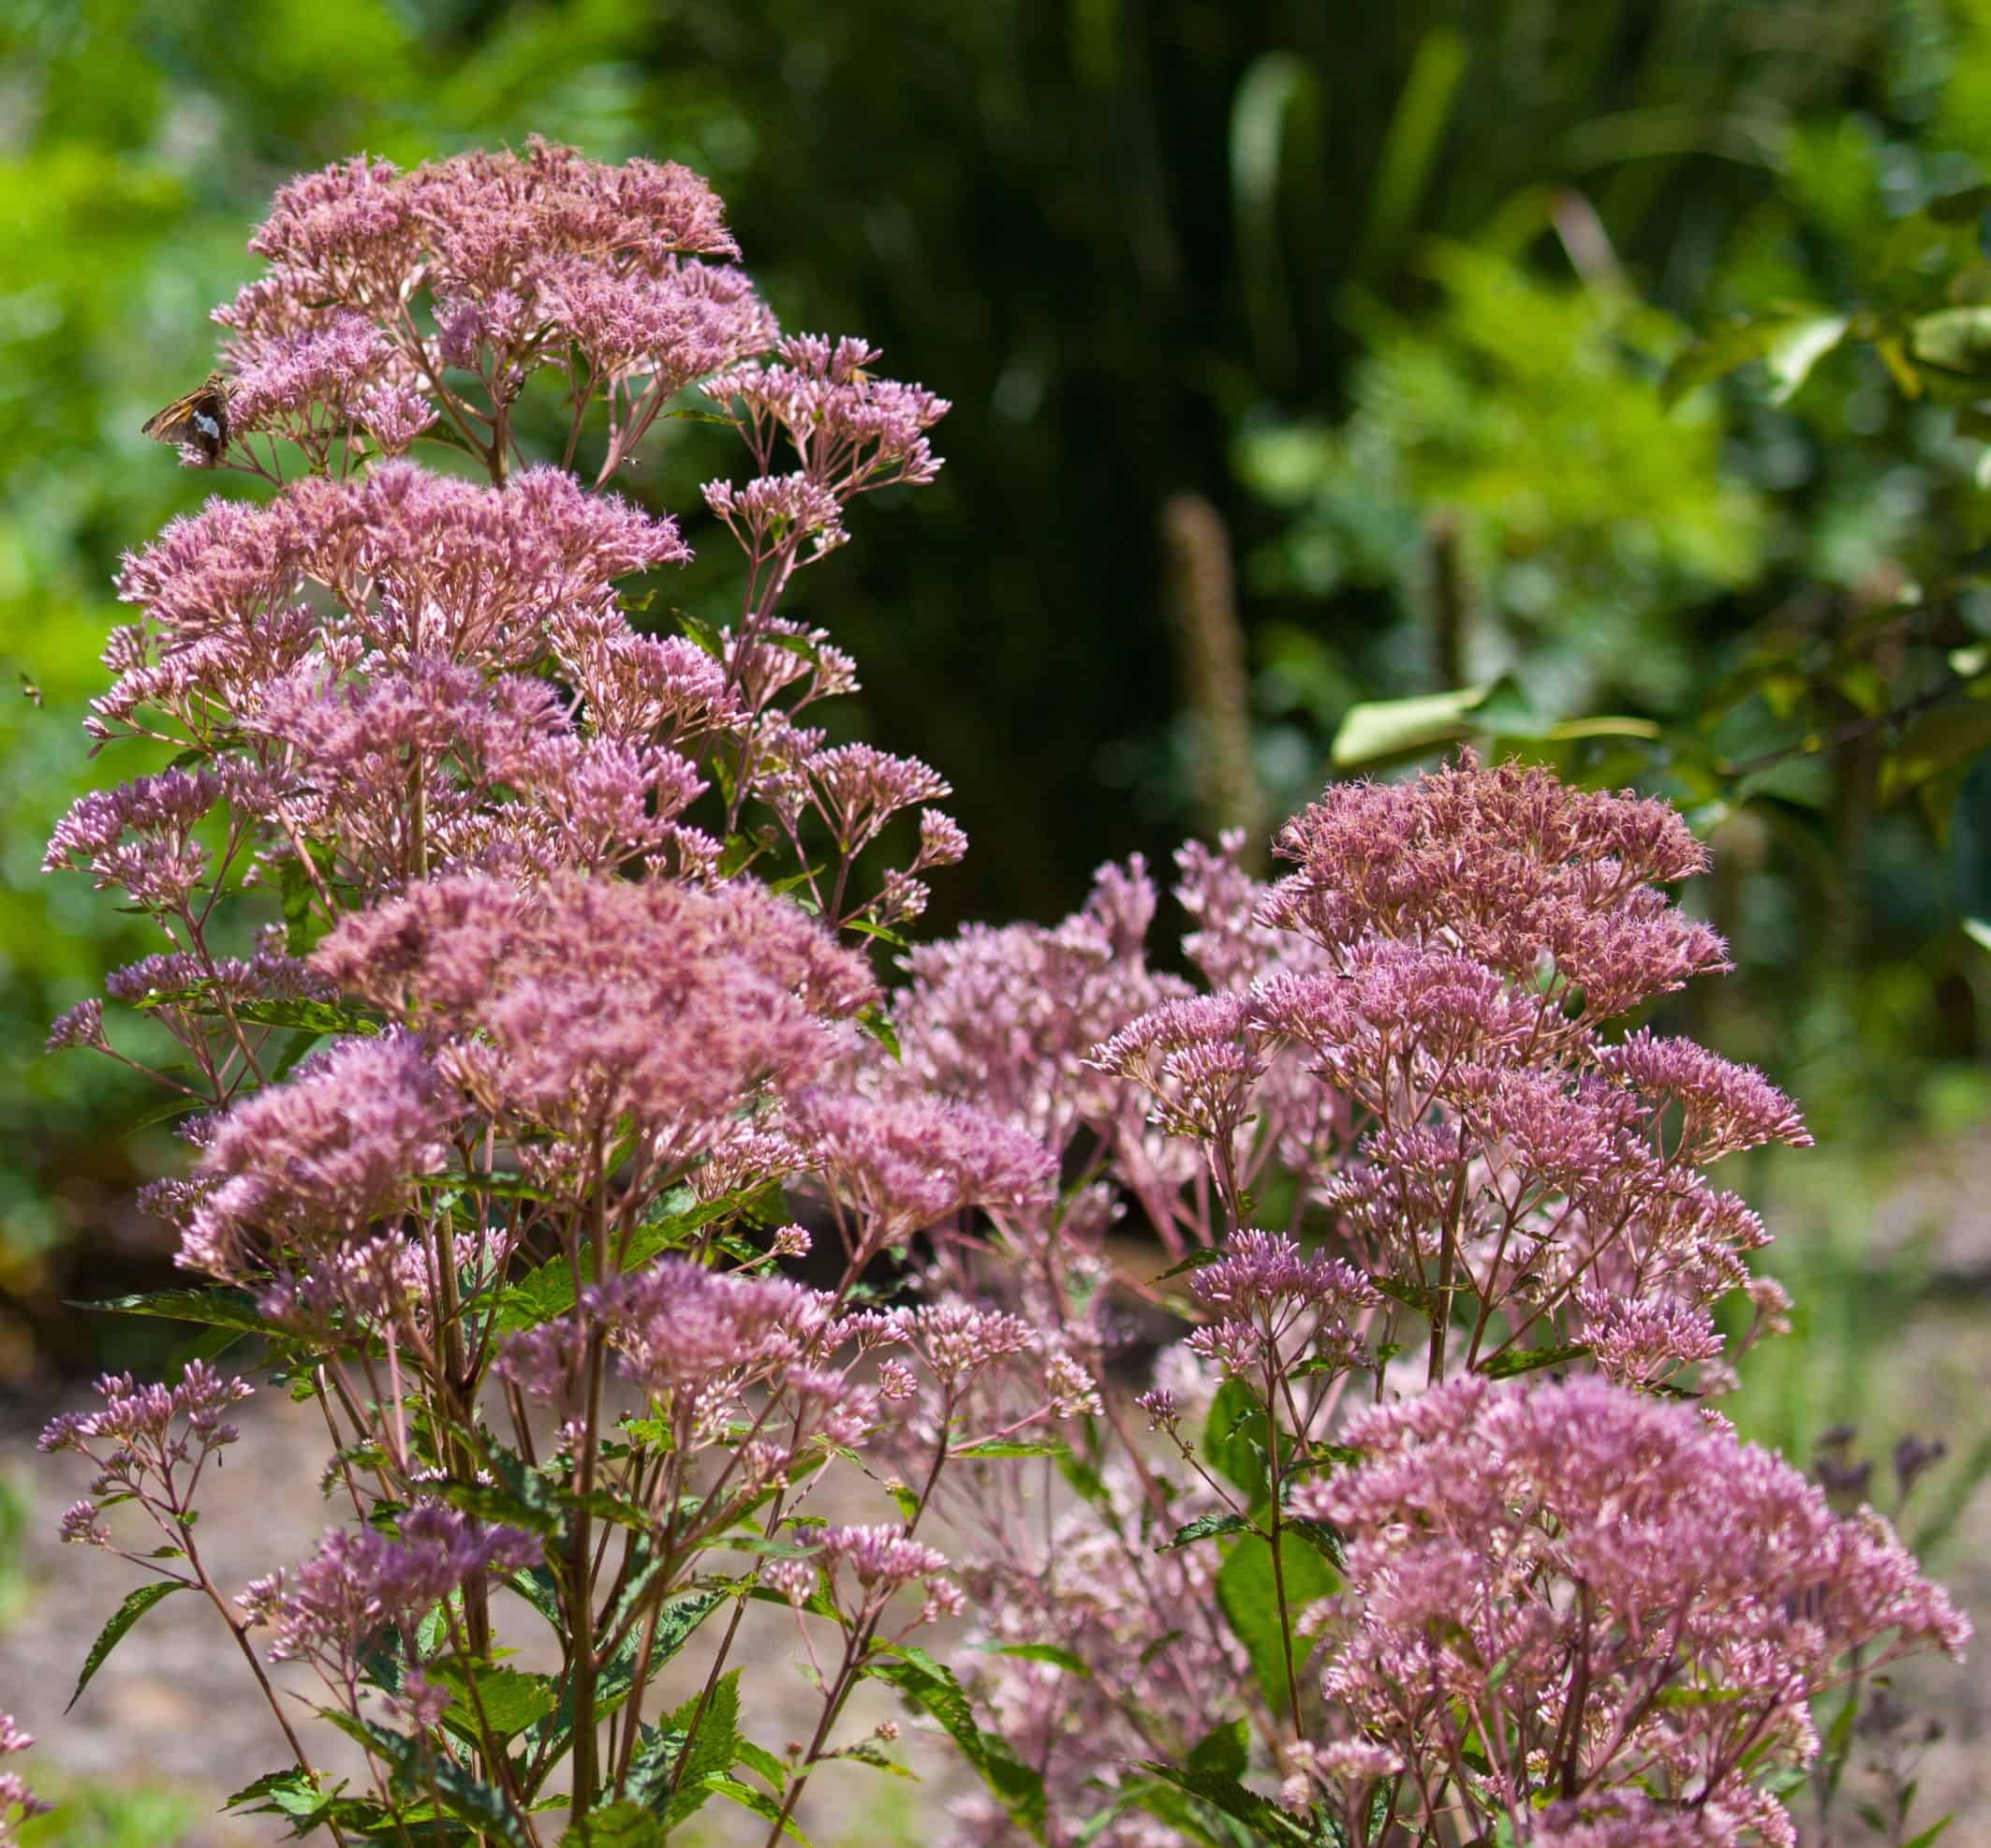 Joe-Pye weed is a popular perennial with bees and other pollinators